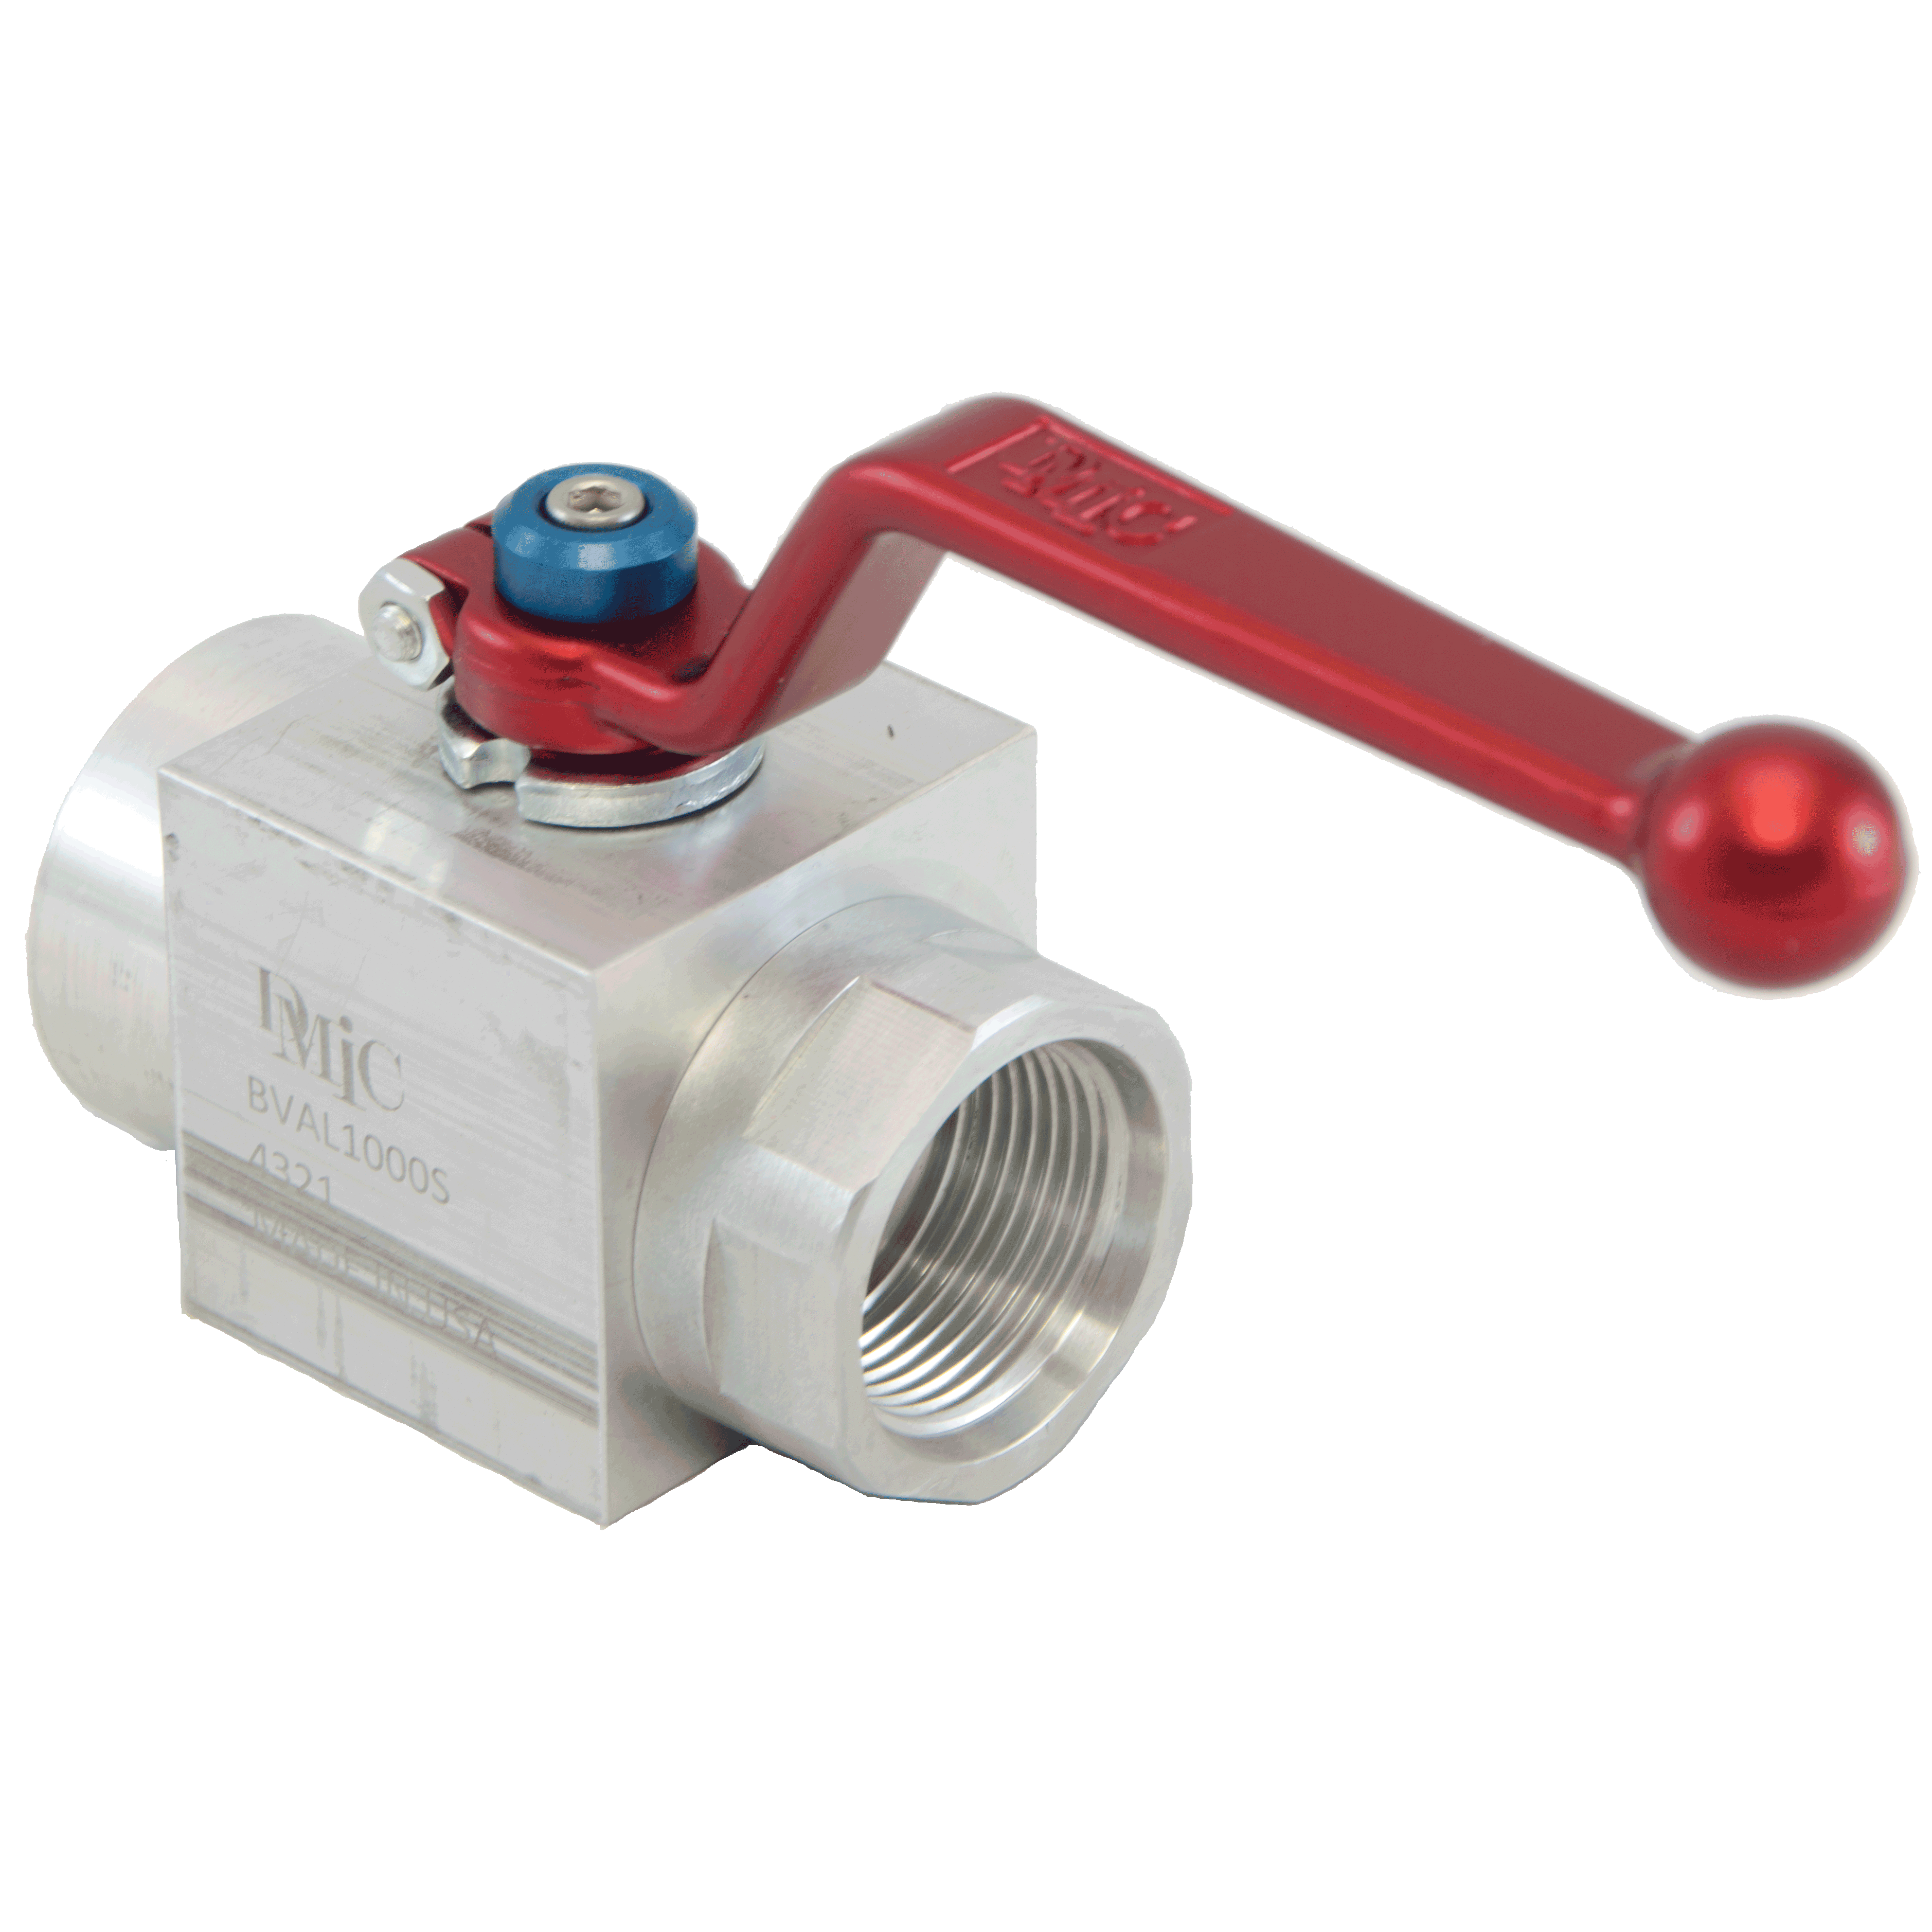 BVAL-0375S-4321 : DMIC Suction Ball Valve, #6 SAE (3/8), Aluminum, 600psi, Two-Way